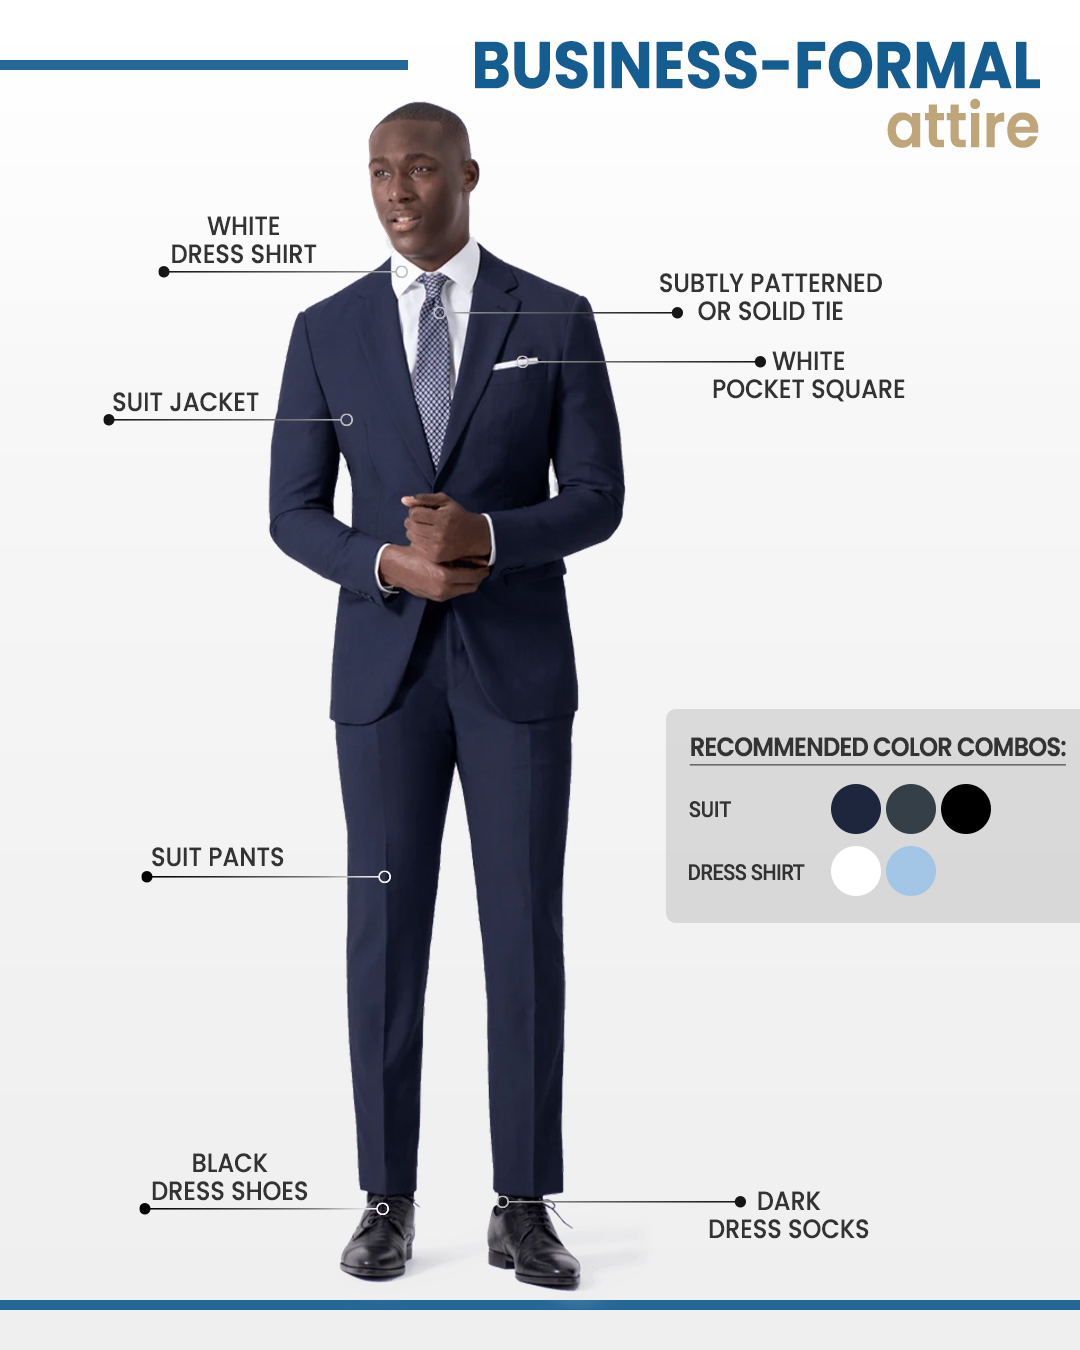 Business Professional Attire: Tips on How To Dress for It | Indeed.com